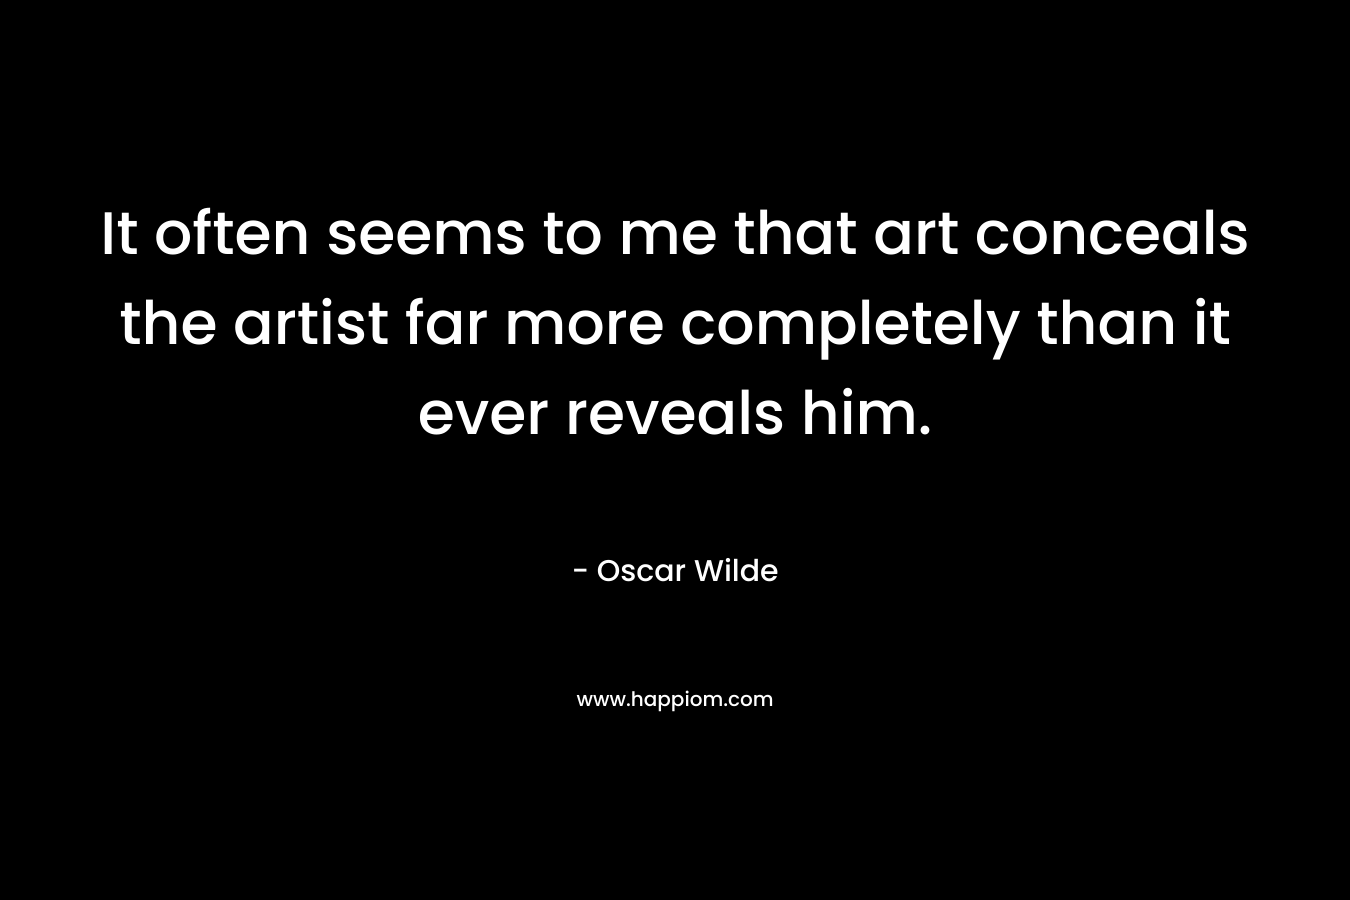 It often seems to me that art conceals the artist far more completely than it ever reveals him. – Oscar Wilde